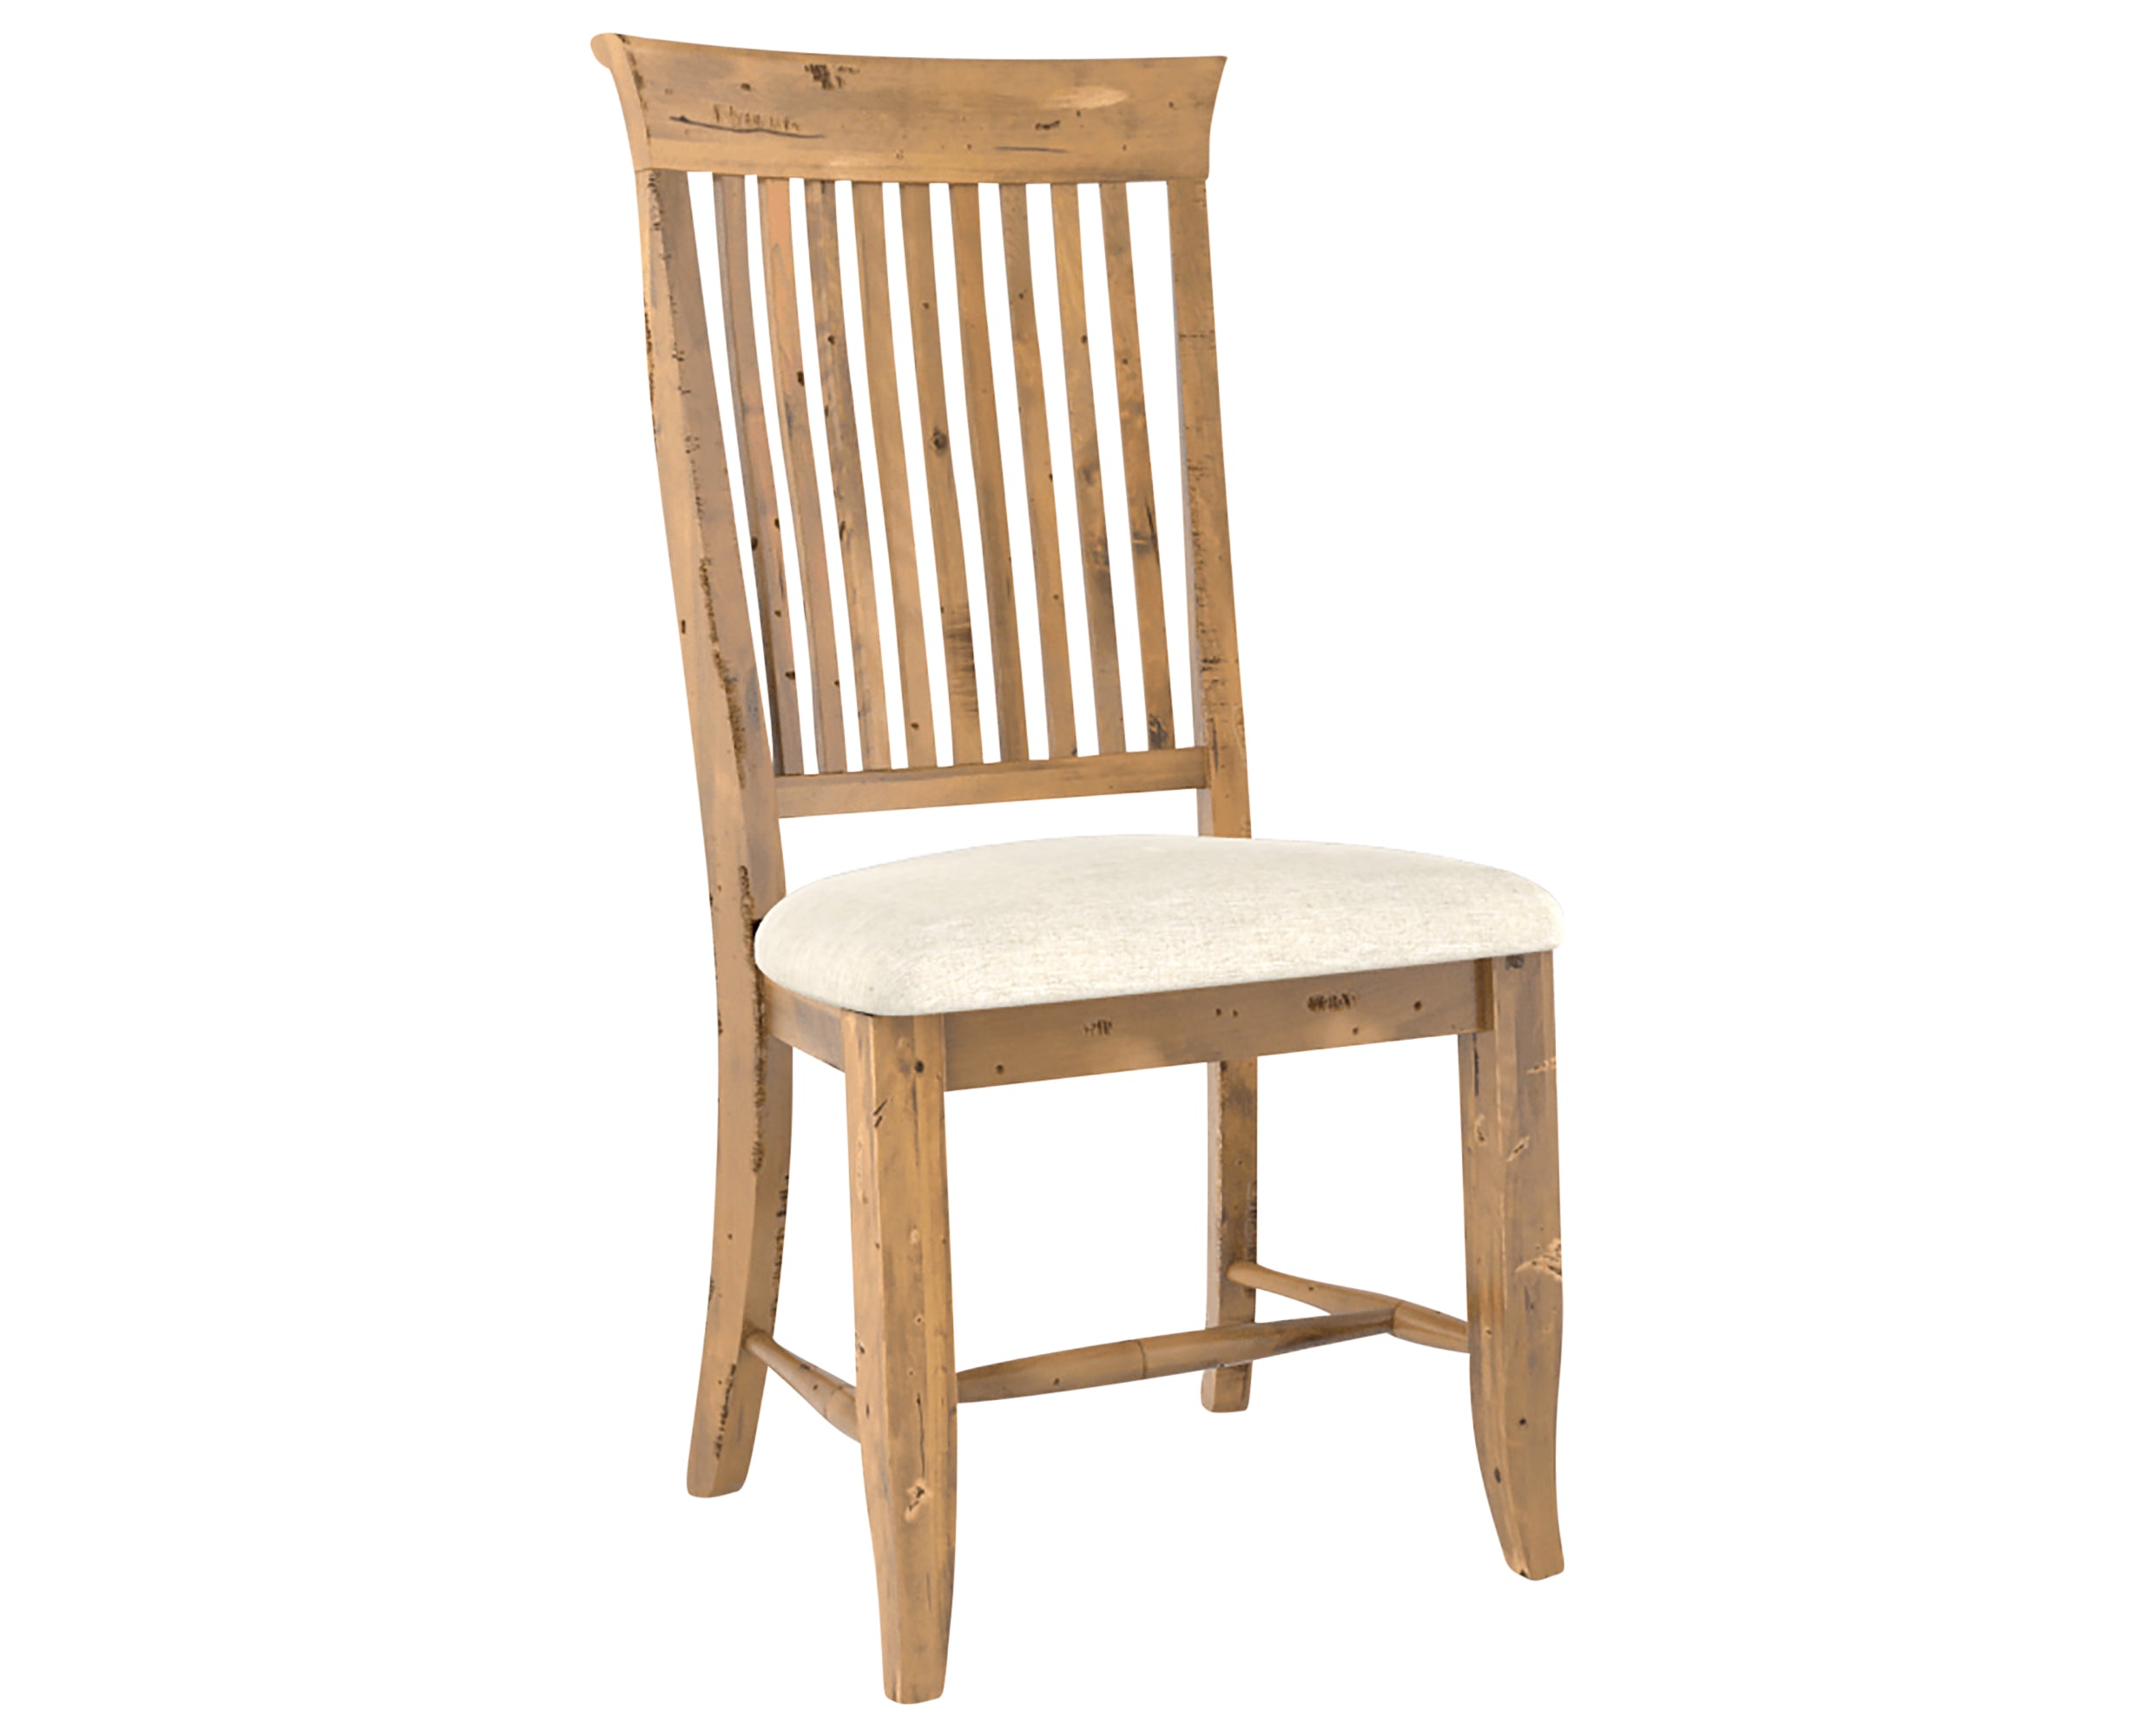 Oak Washed and Fabric TW | Canadel Champlain Dining Chair 3528 | Valley Ridge Furniture